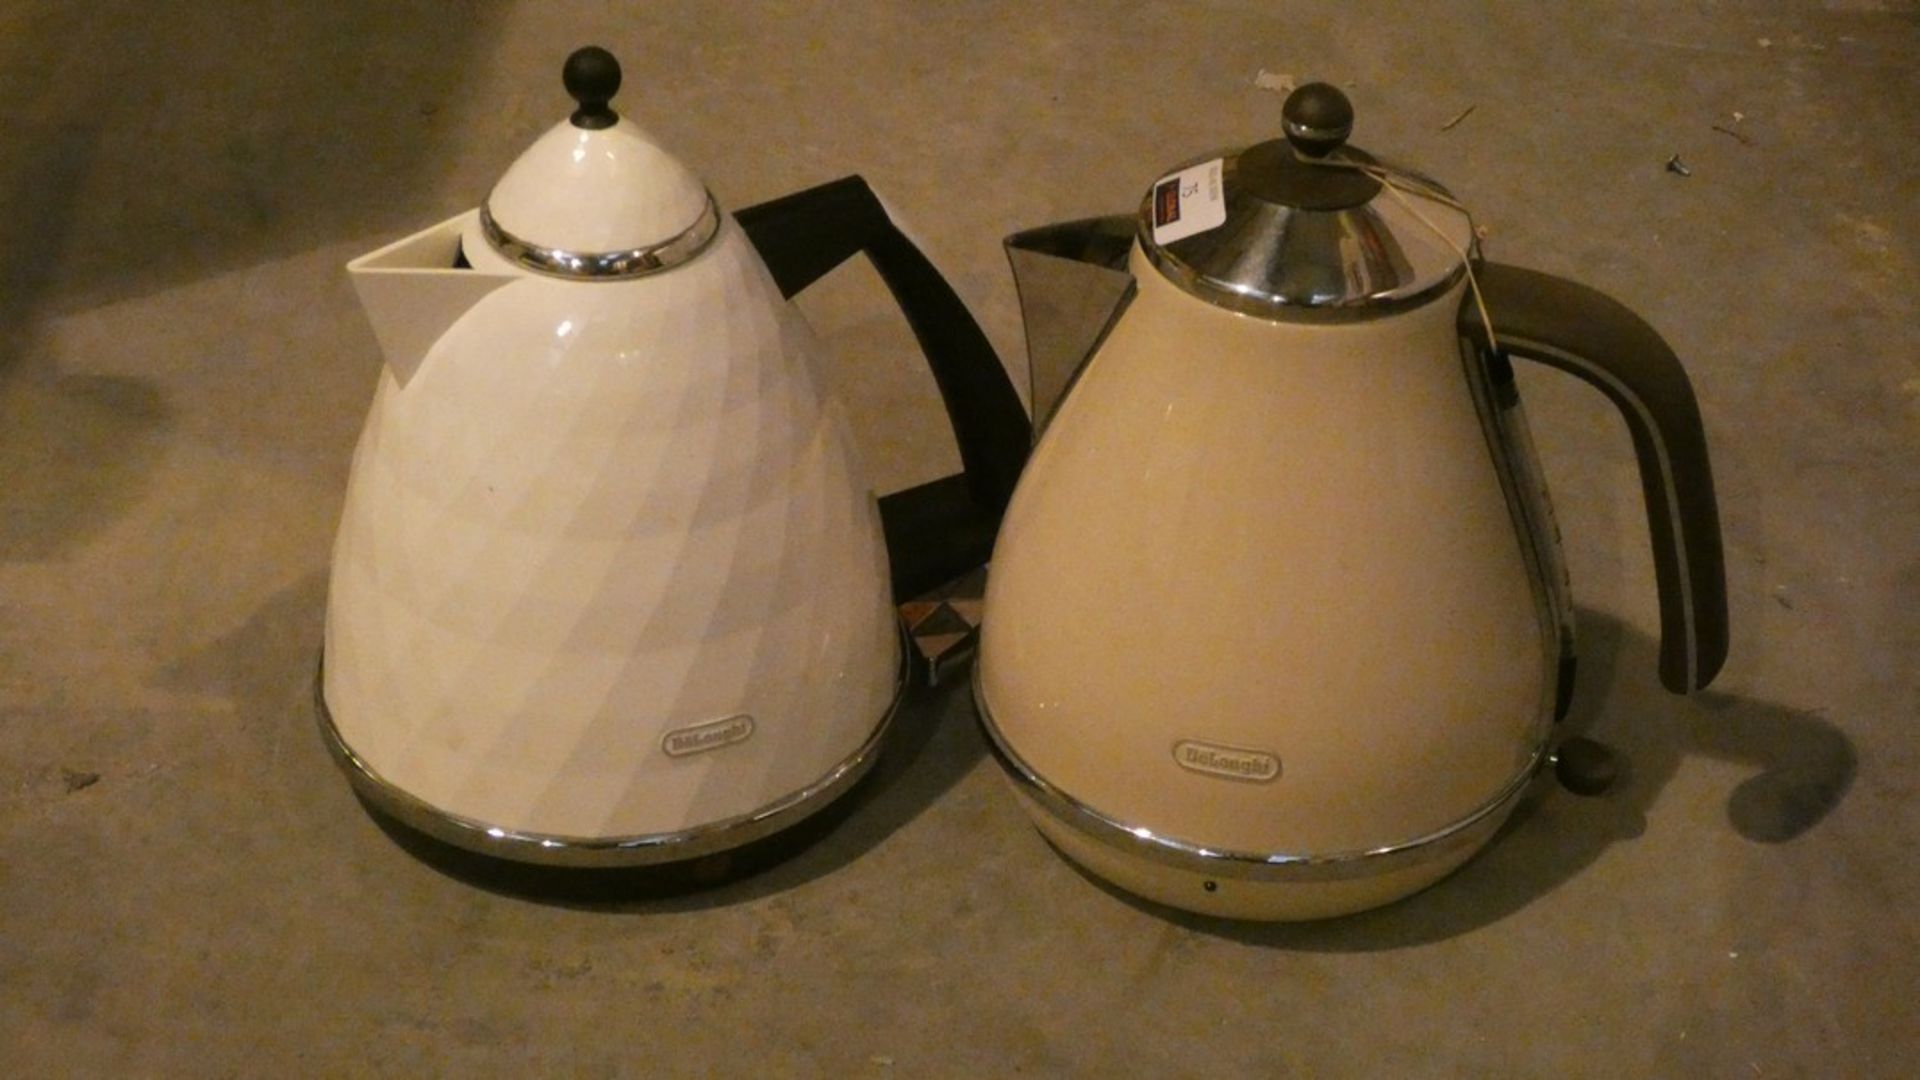 Lot to Contain 2 Assorted Delonghi 1.5L Cordless Jug Kettles From Iona nd Brilliante Range Both